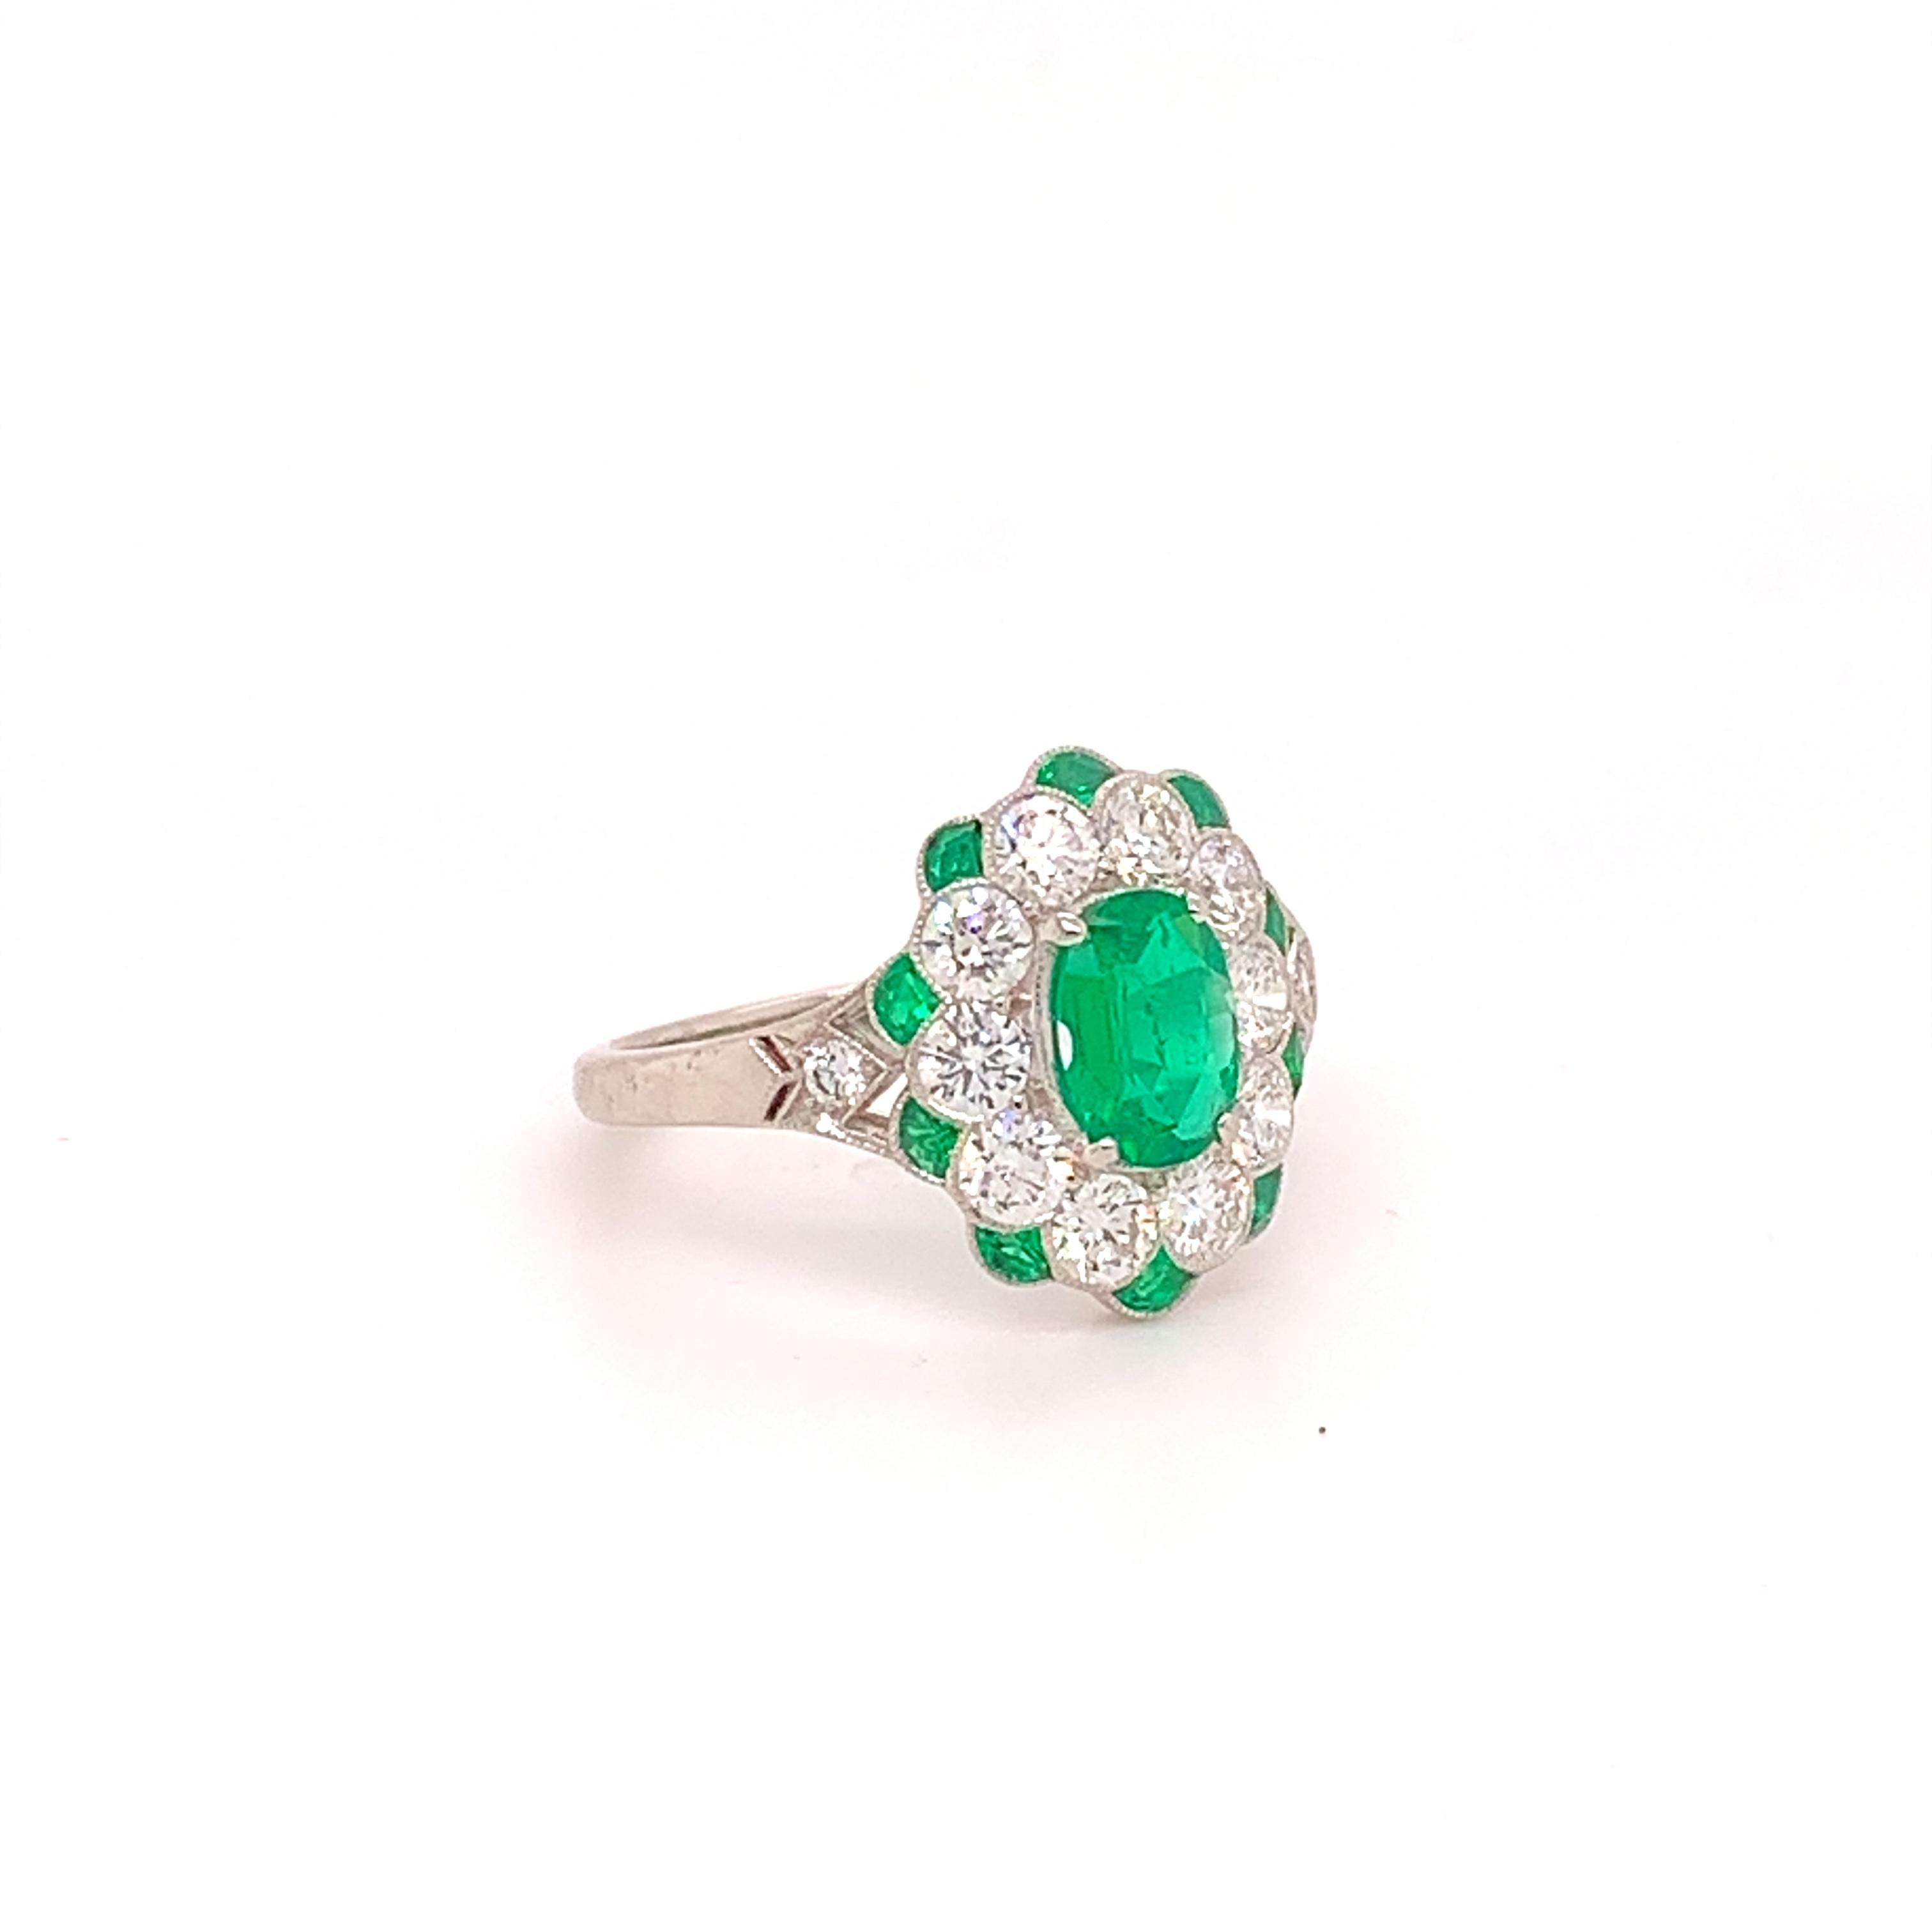 Fine Platinum Genuine Natural Emerald and Diamond Ring (#J4857)

Platinum emerald and diamond ring with specialty cut emerald accents, 1.50 carats total weight emeralds, top color and clean, almost 1ct in round brilliant cut diamonds, exactly